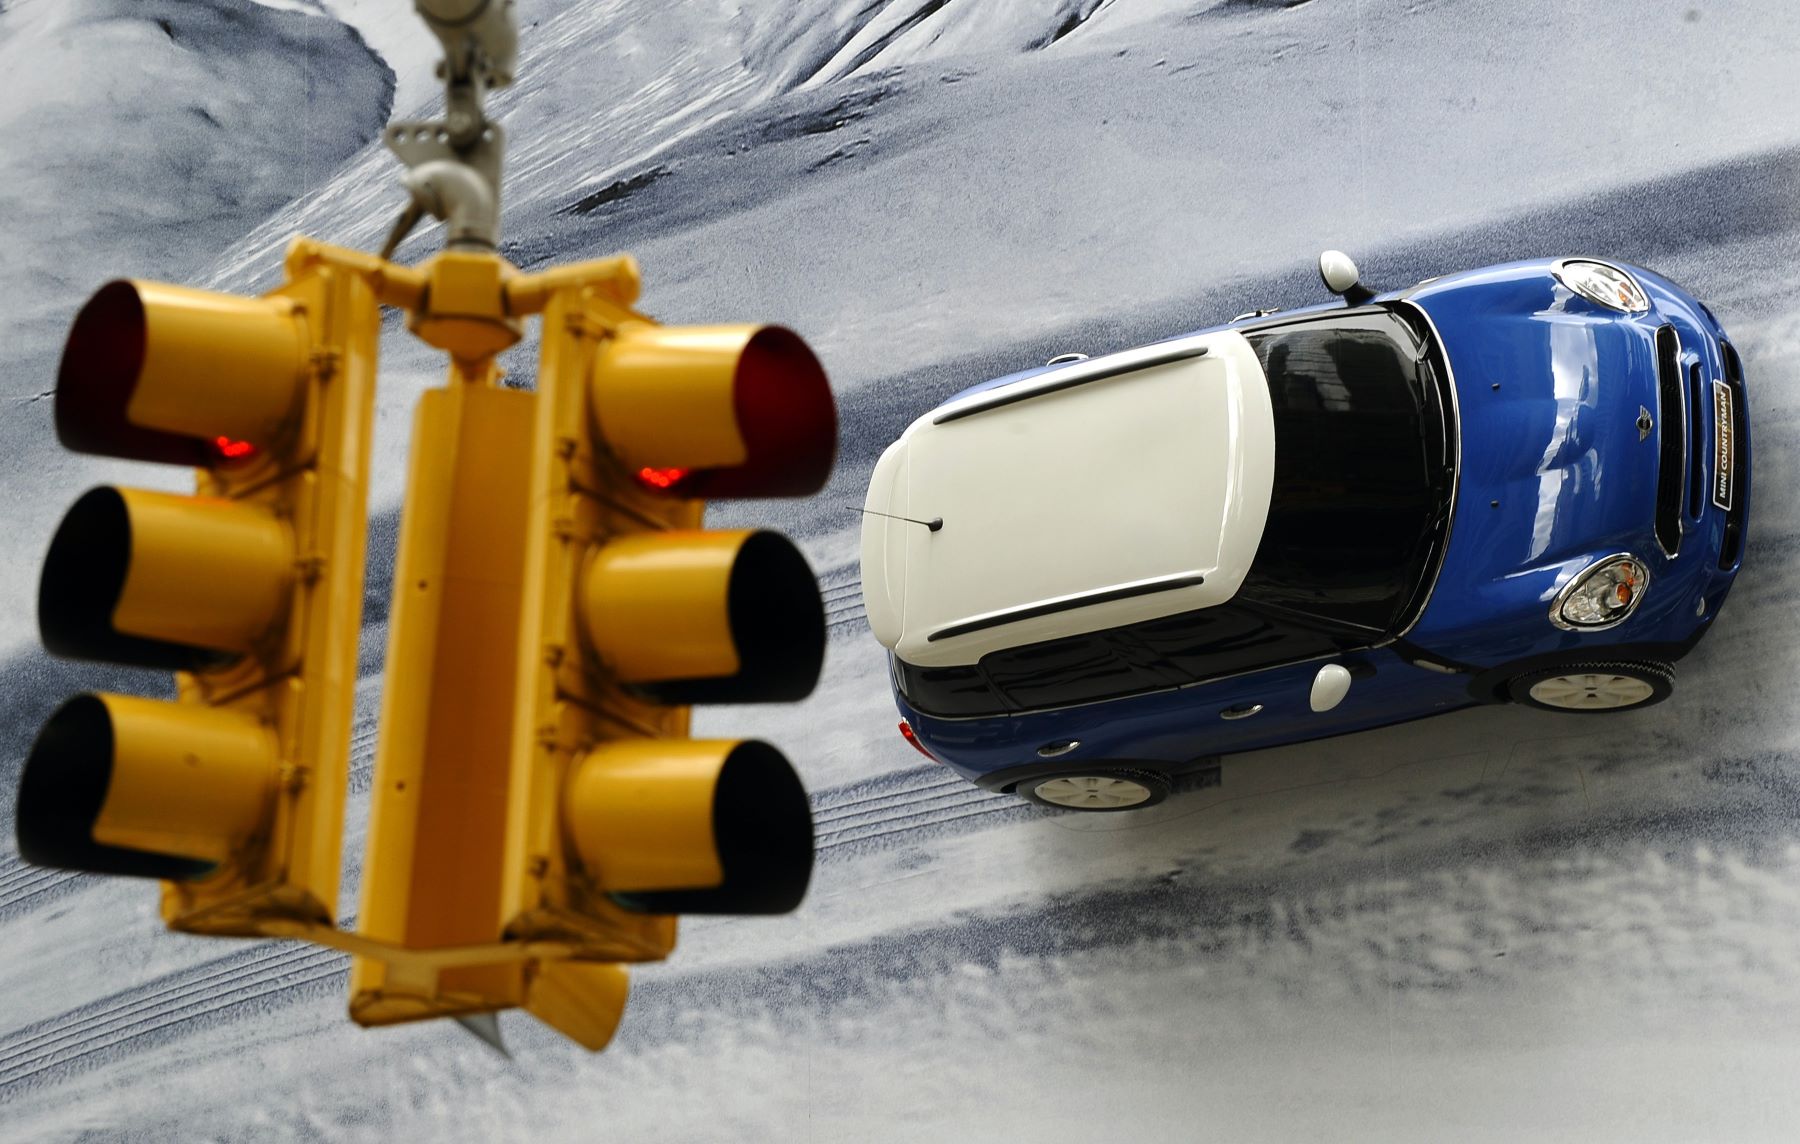 Mini Cooper years to avoid include the pictured 2011 Mini Cooper S Countryman driving in snow